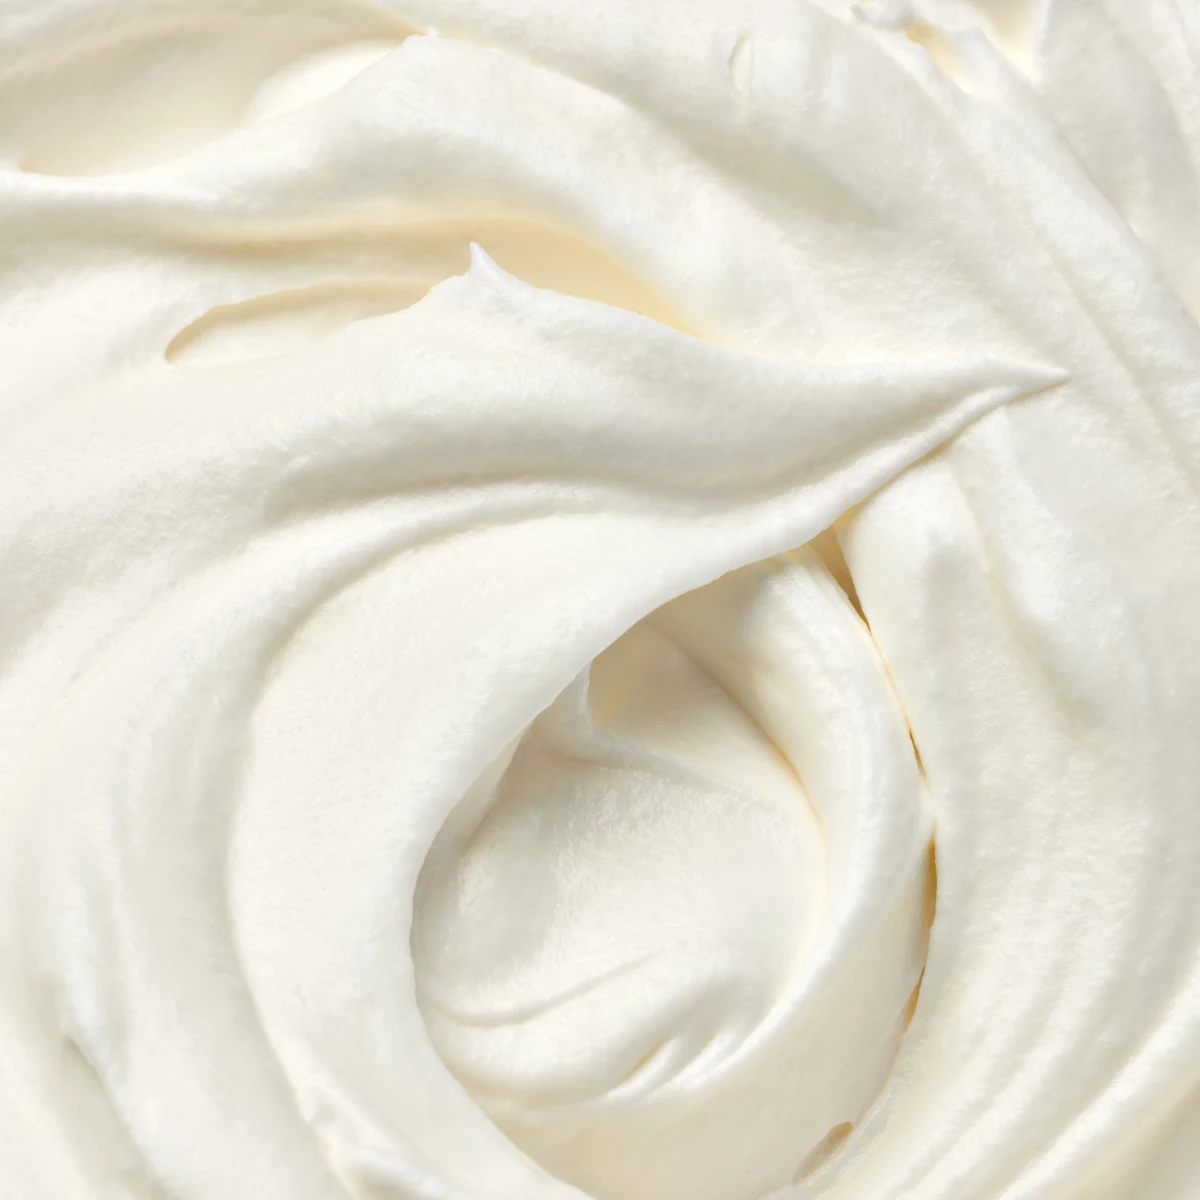 whipped shea butter and coconut oil